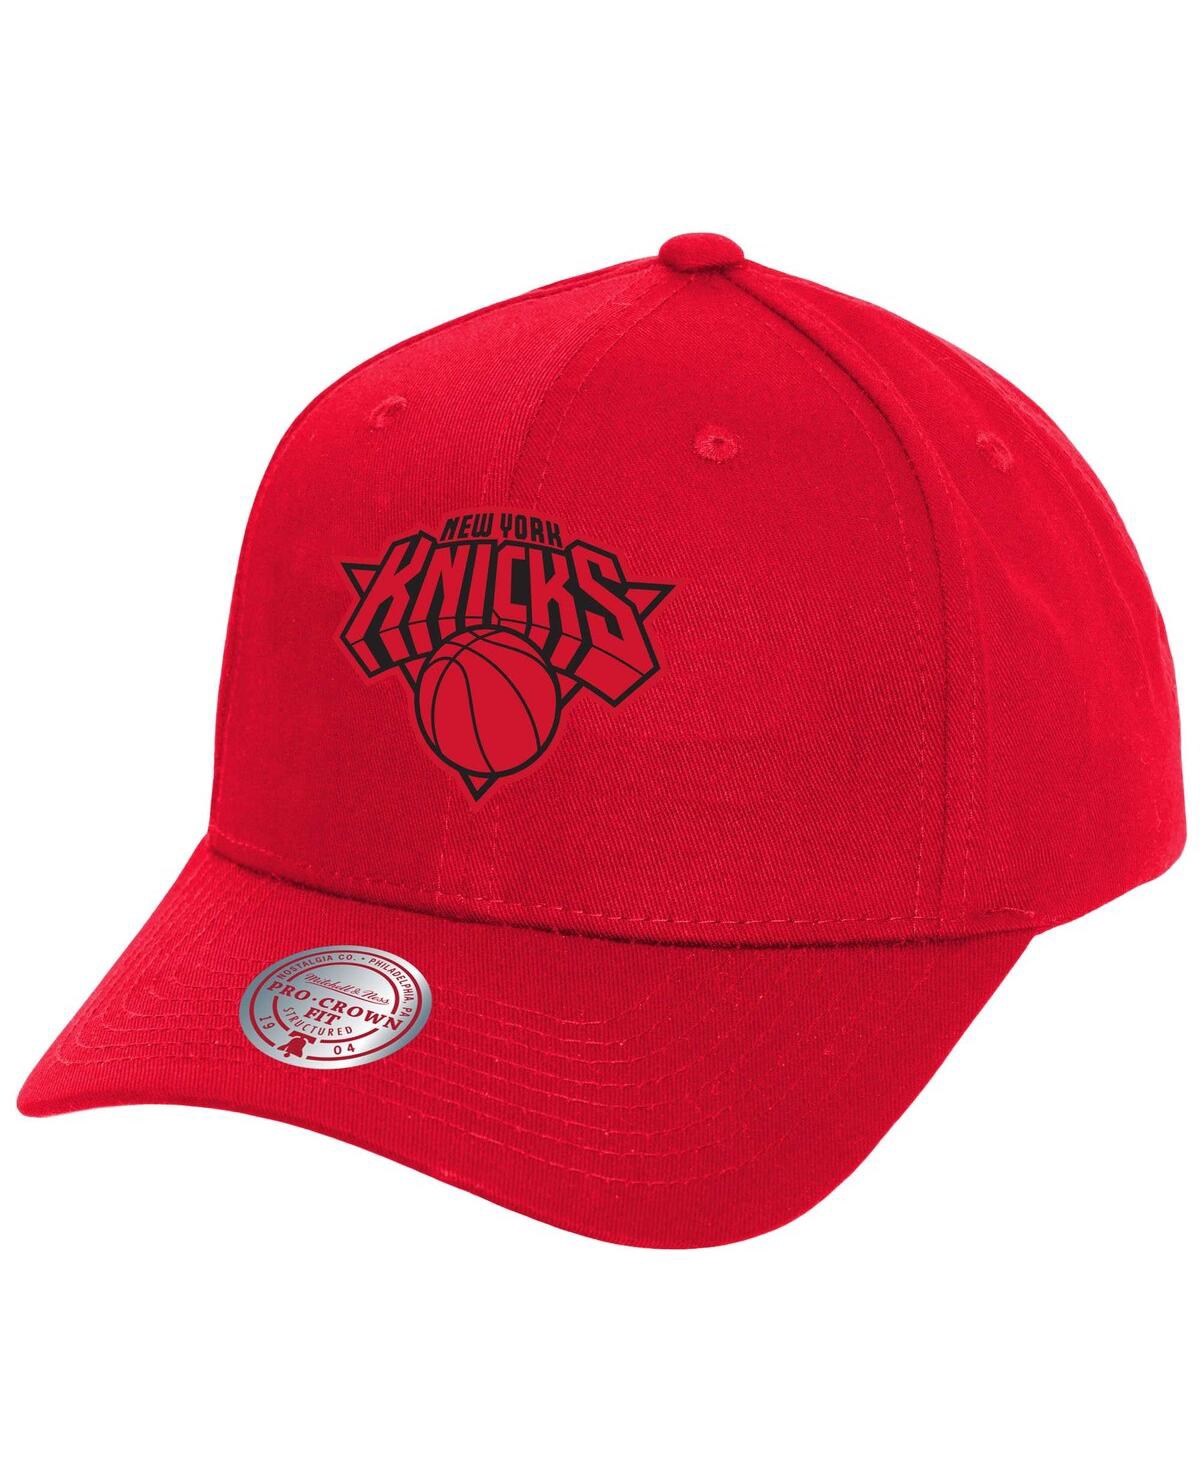 Mitchell Ness Men's Red New York Knicks Fire Red Pro Crown Snapback Hat - Red